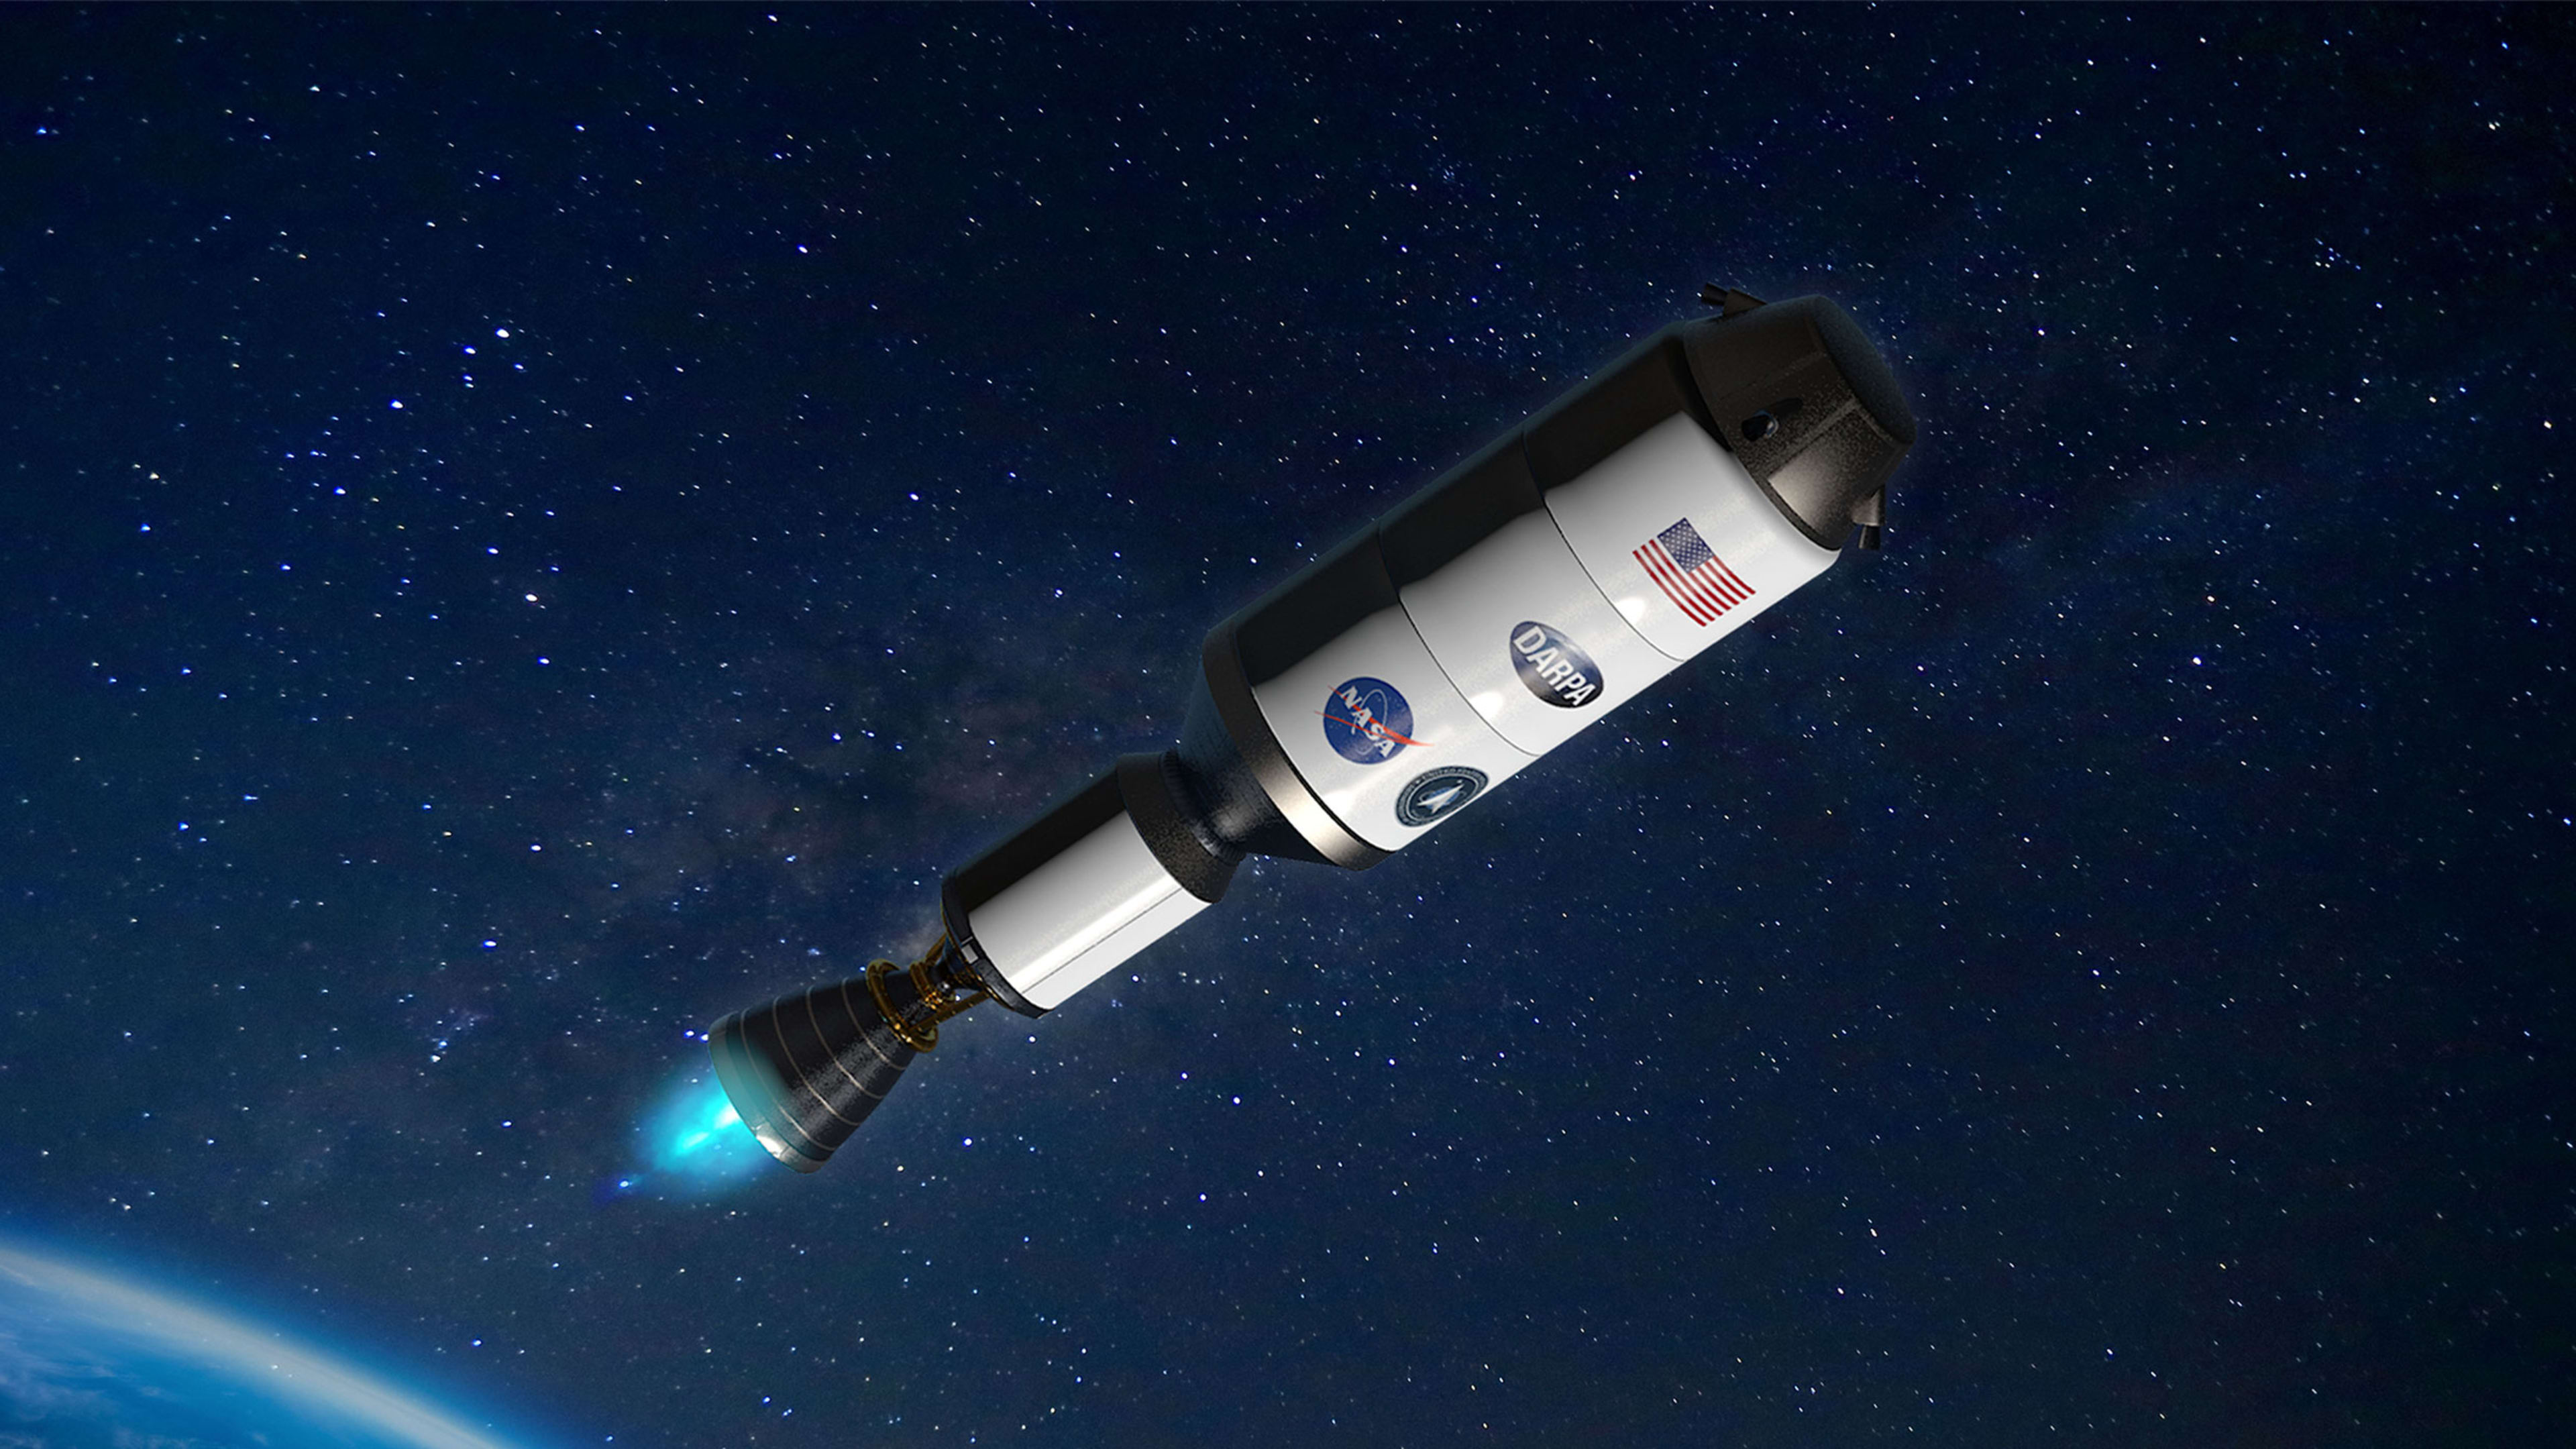 Express to Mars? NASA and the Pentagon award contract to build the first nuclear-powered rocket